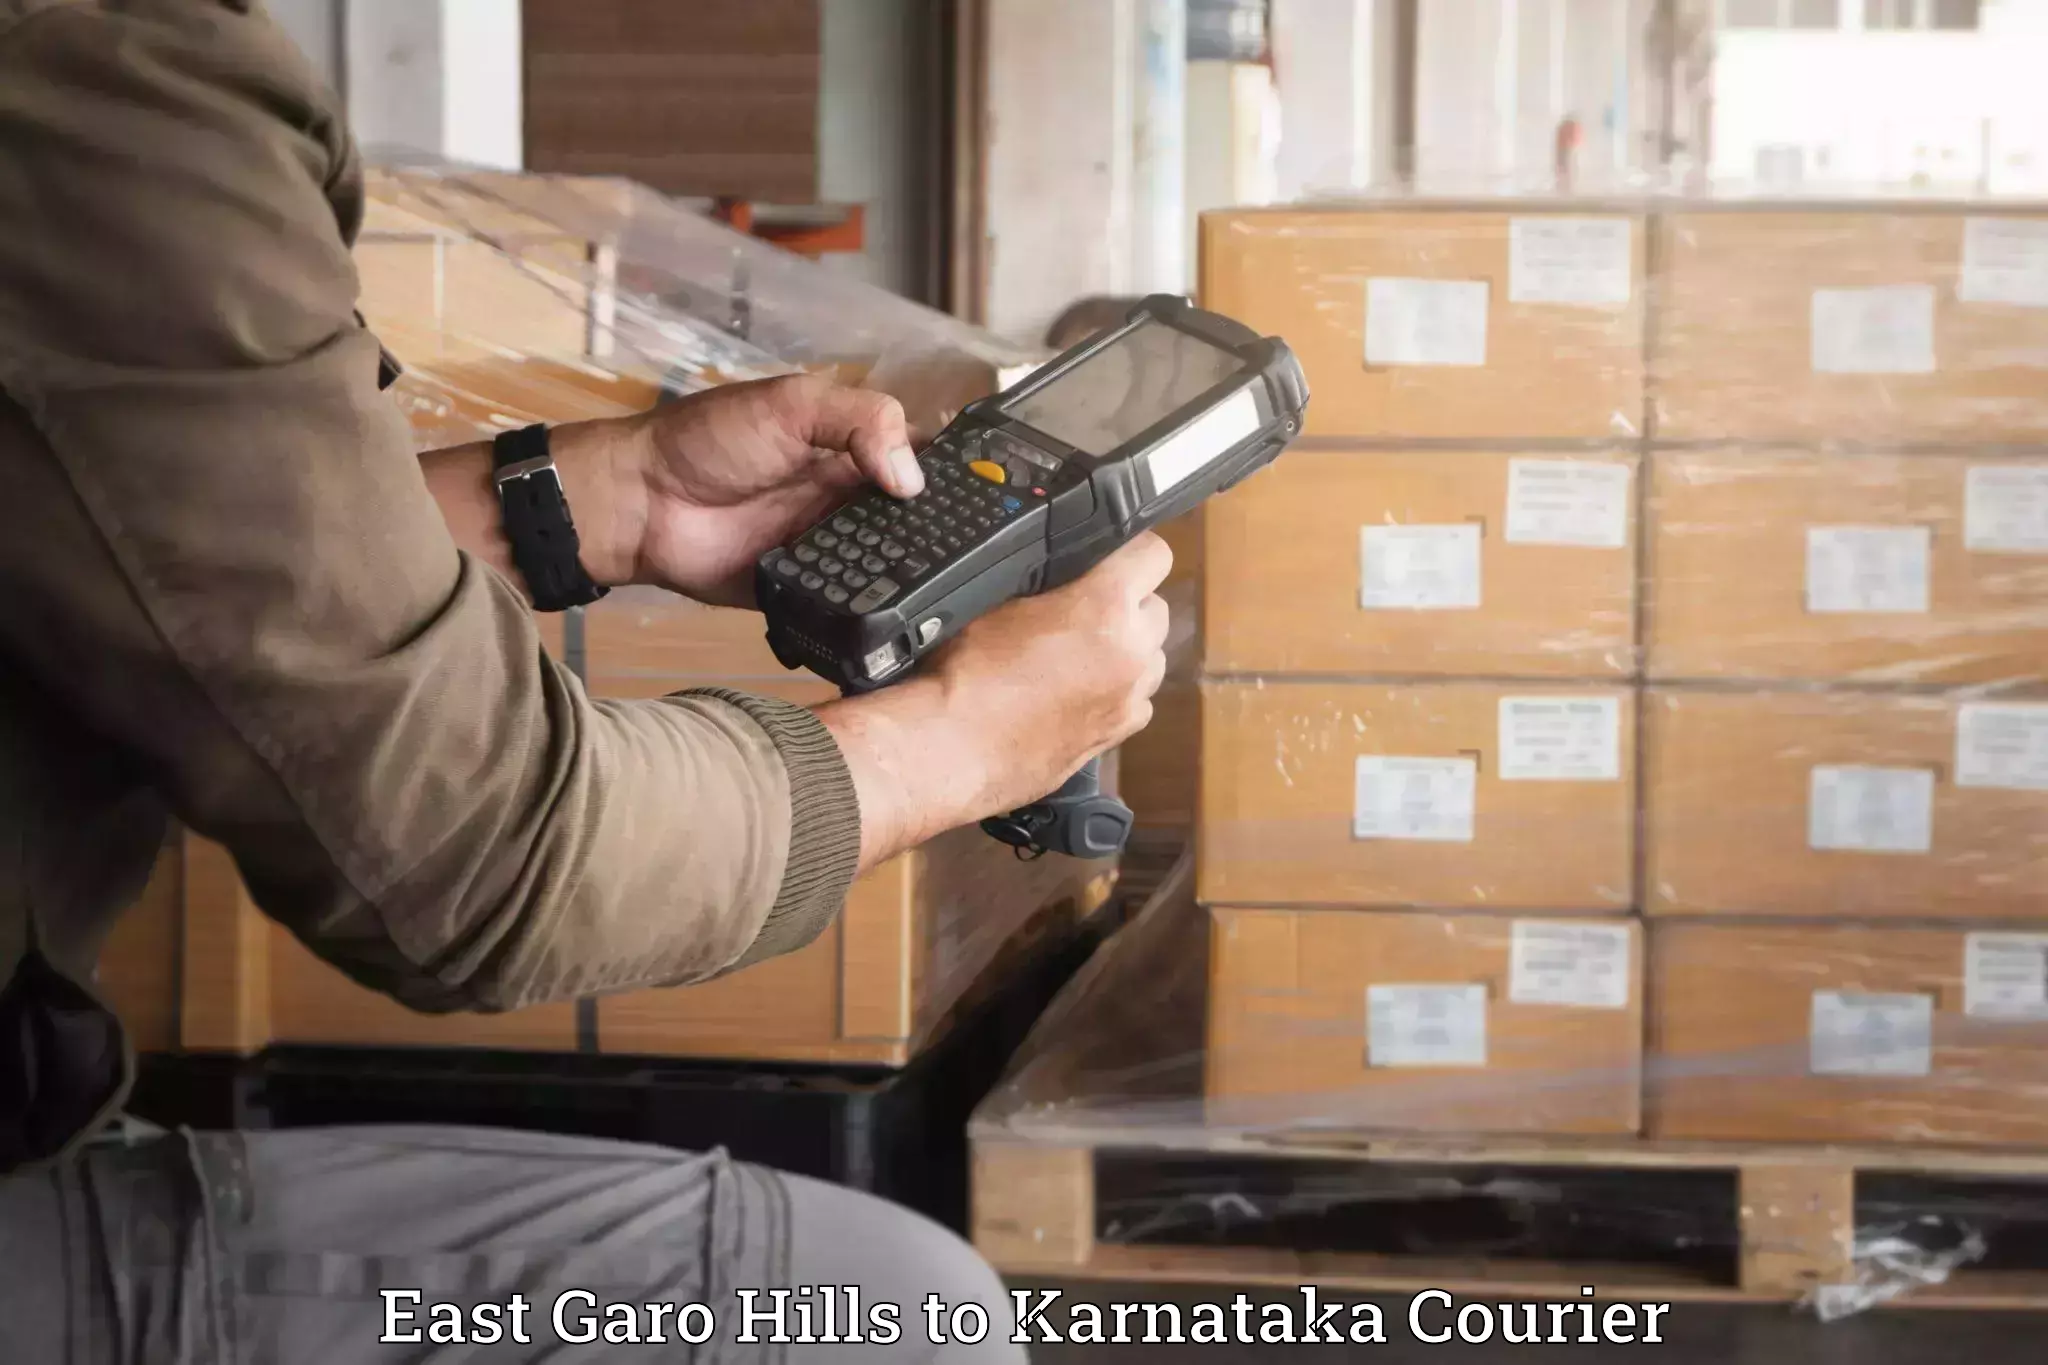 Luggage delivery app East Garo Hills to Dabaspet